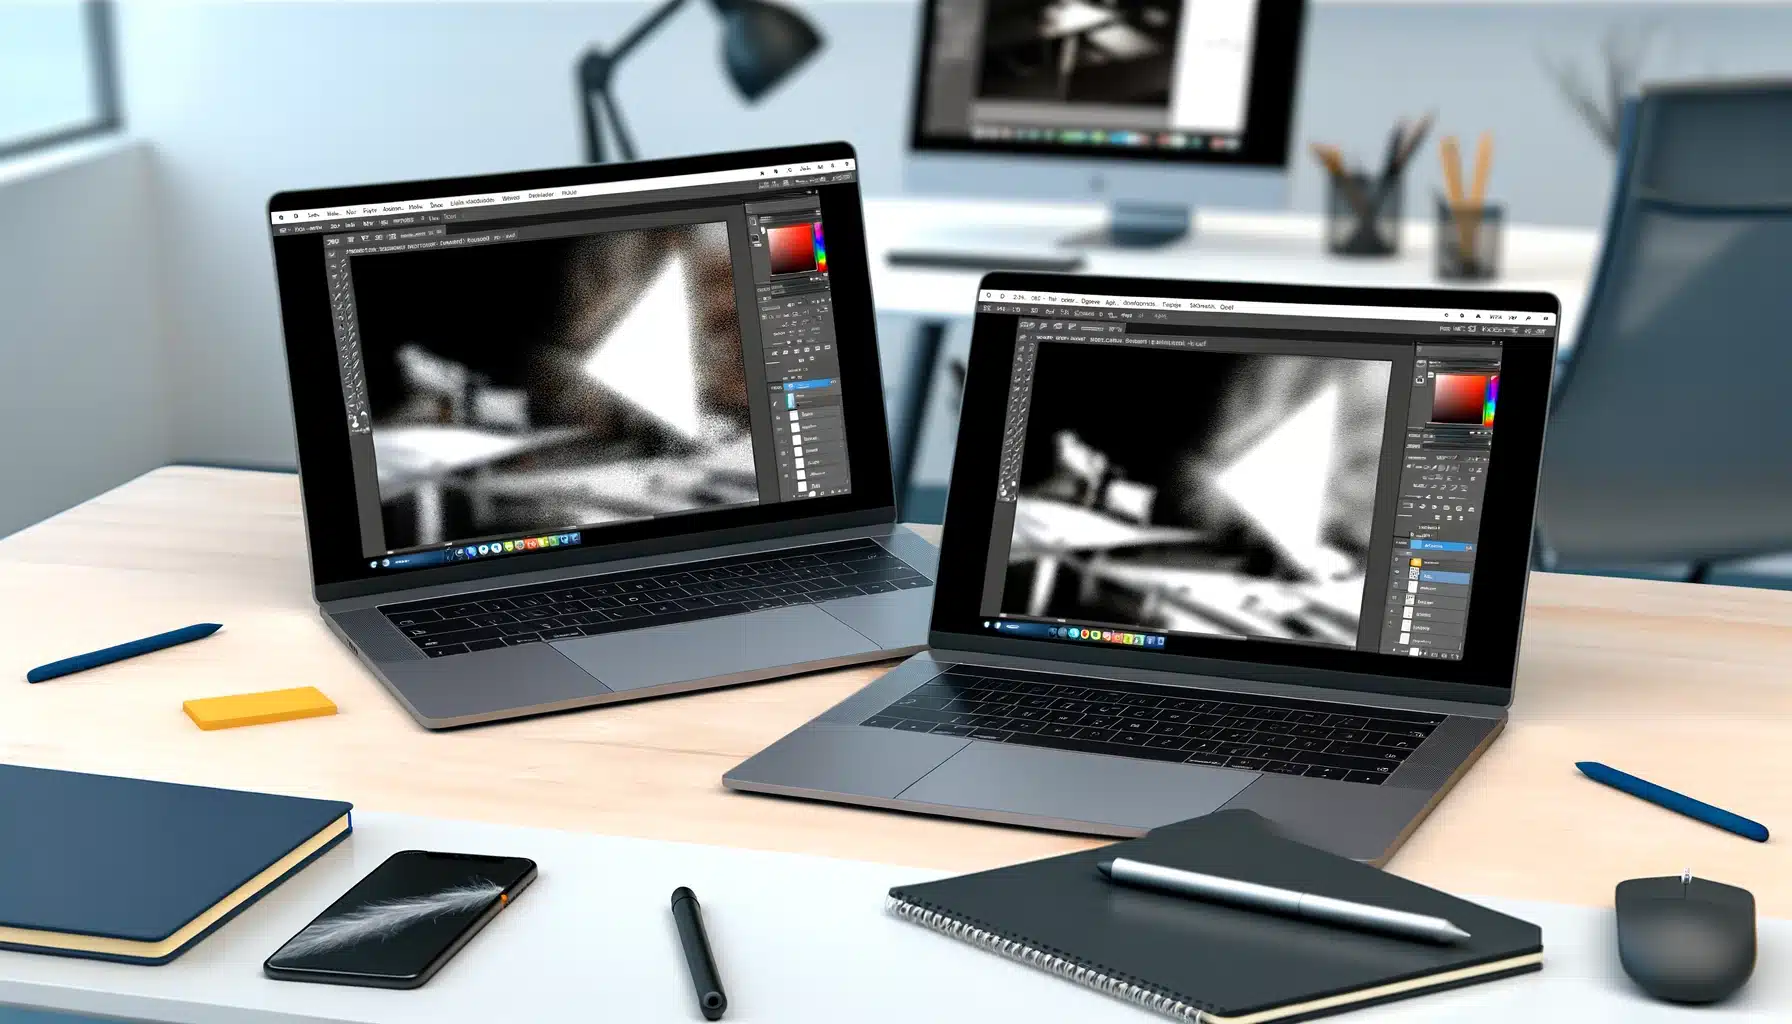 Two laptops on a desk showing before and after effects of image sharpening in Photoshop, in a modern graphic design workspace.